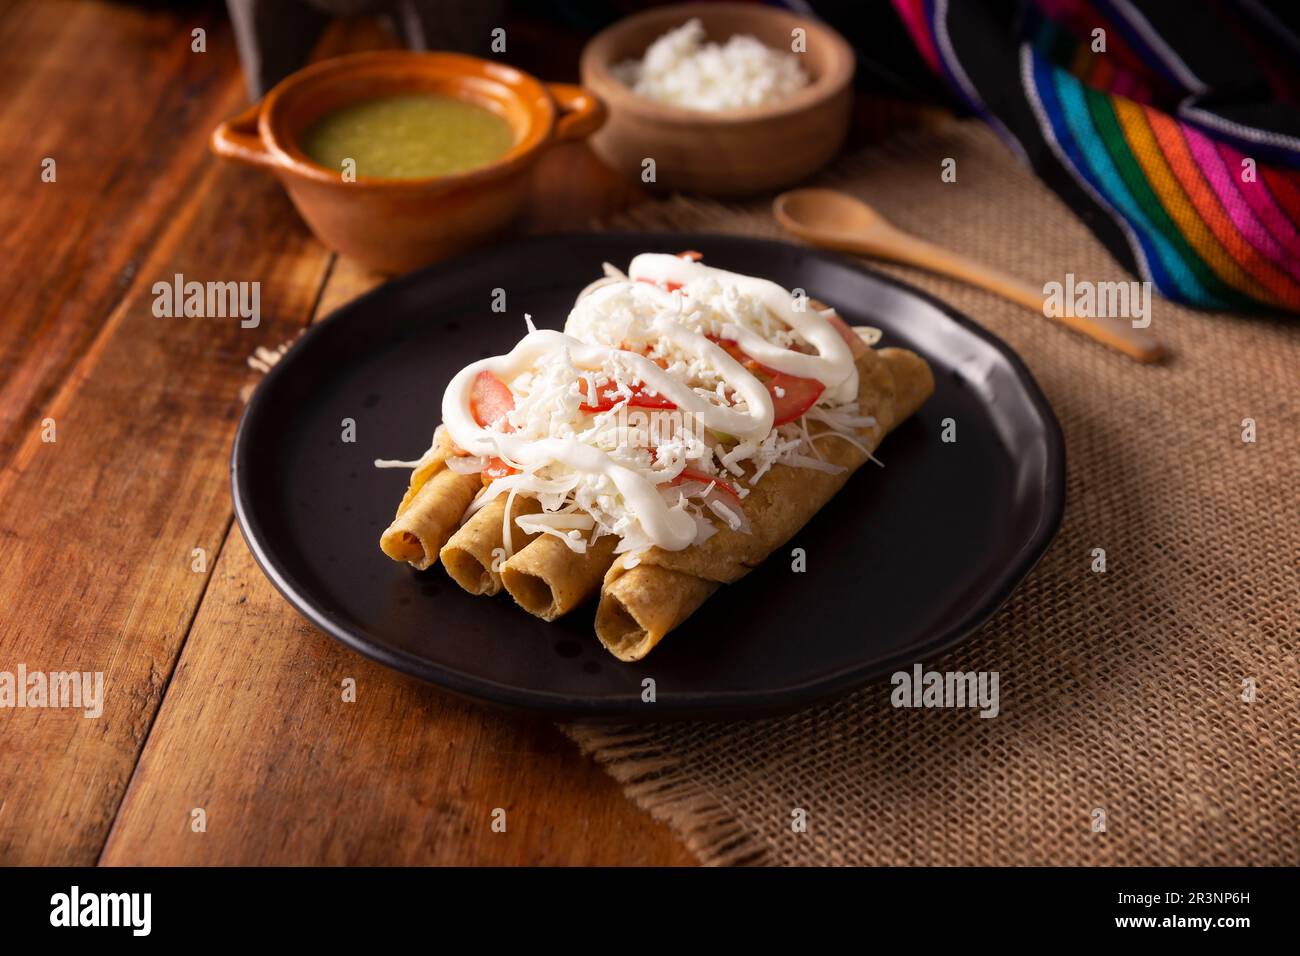 Tacos Dorados. Mexican dish also known as Flautas, consists of a rolled corn tortilla with some filling, commonly chicken or beef or vegetarian option Stock Photo